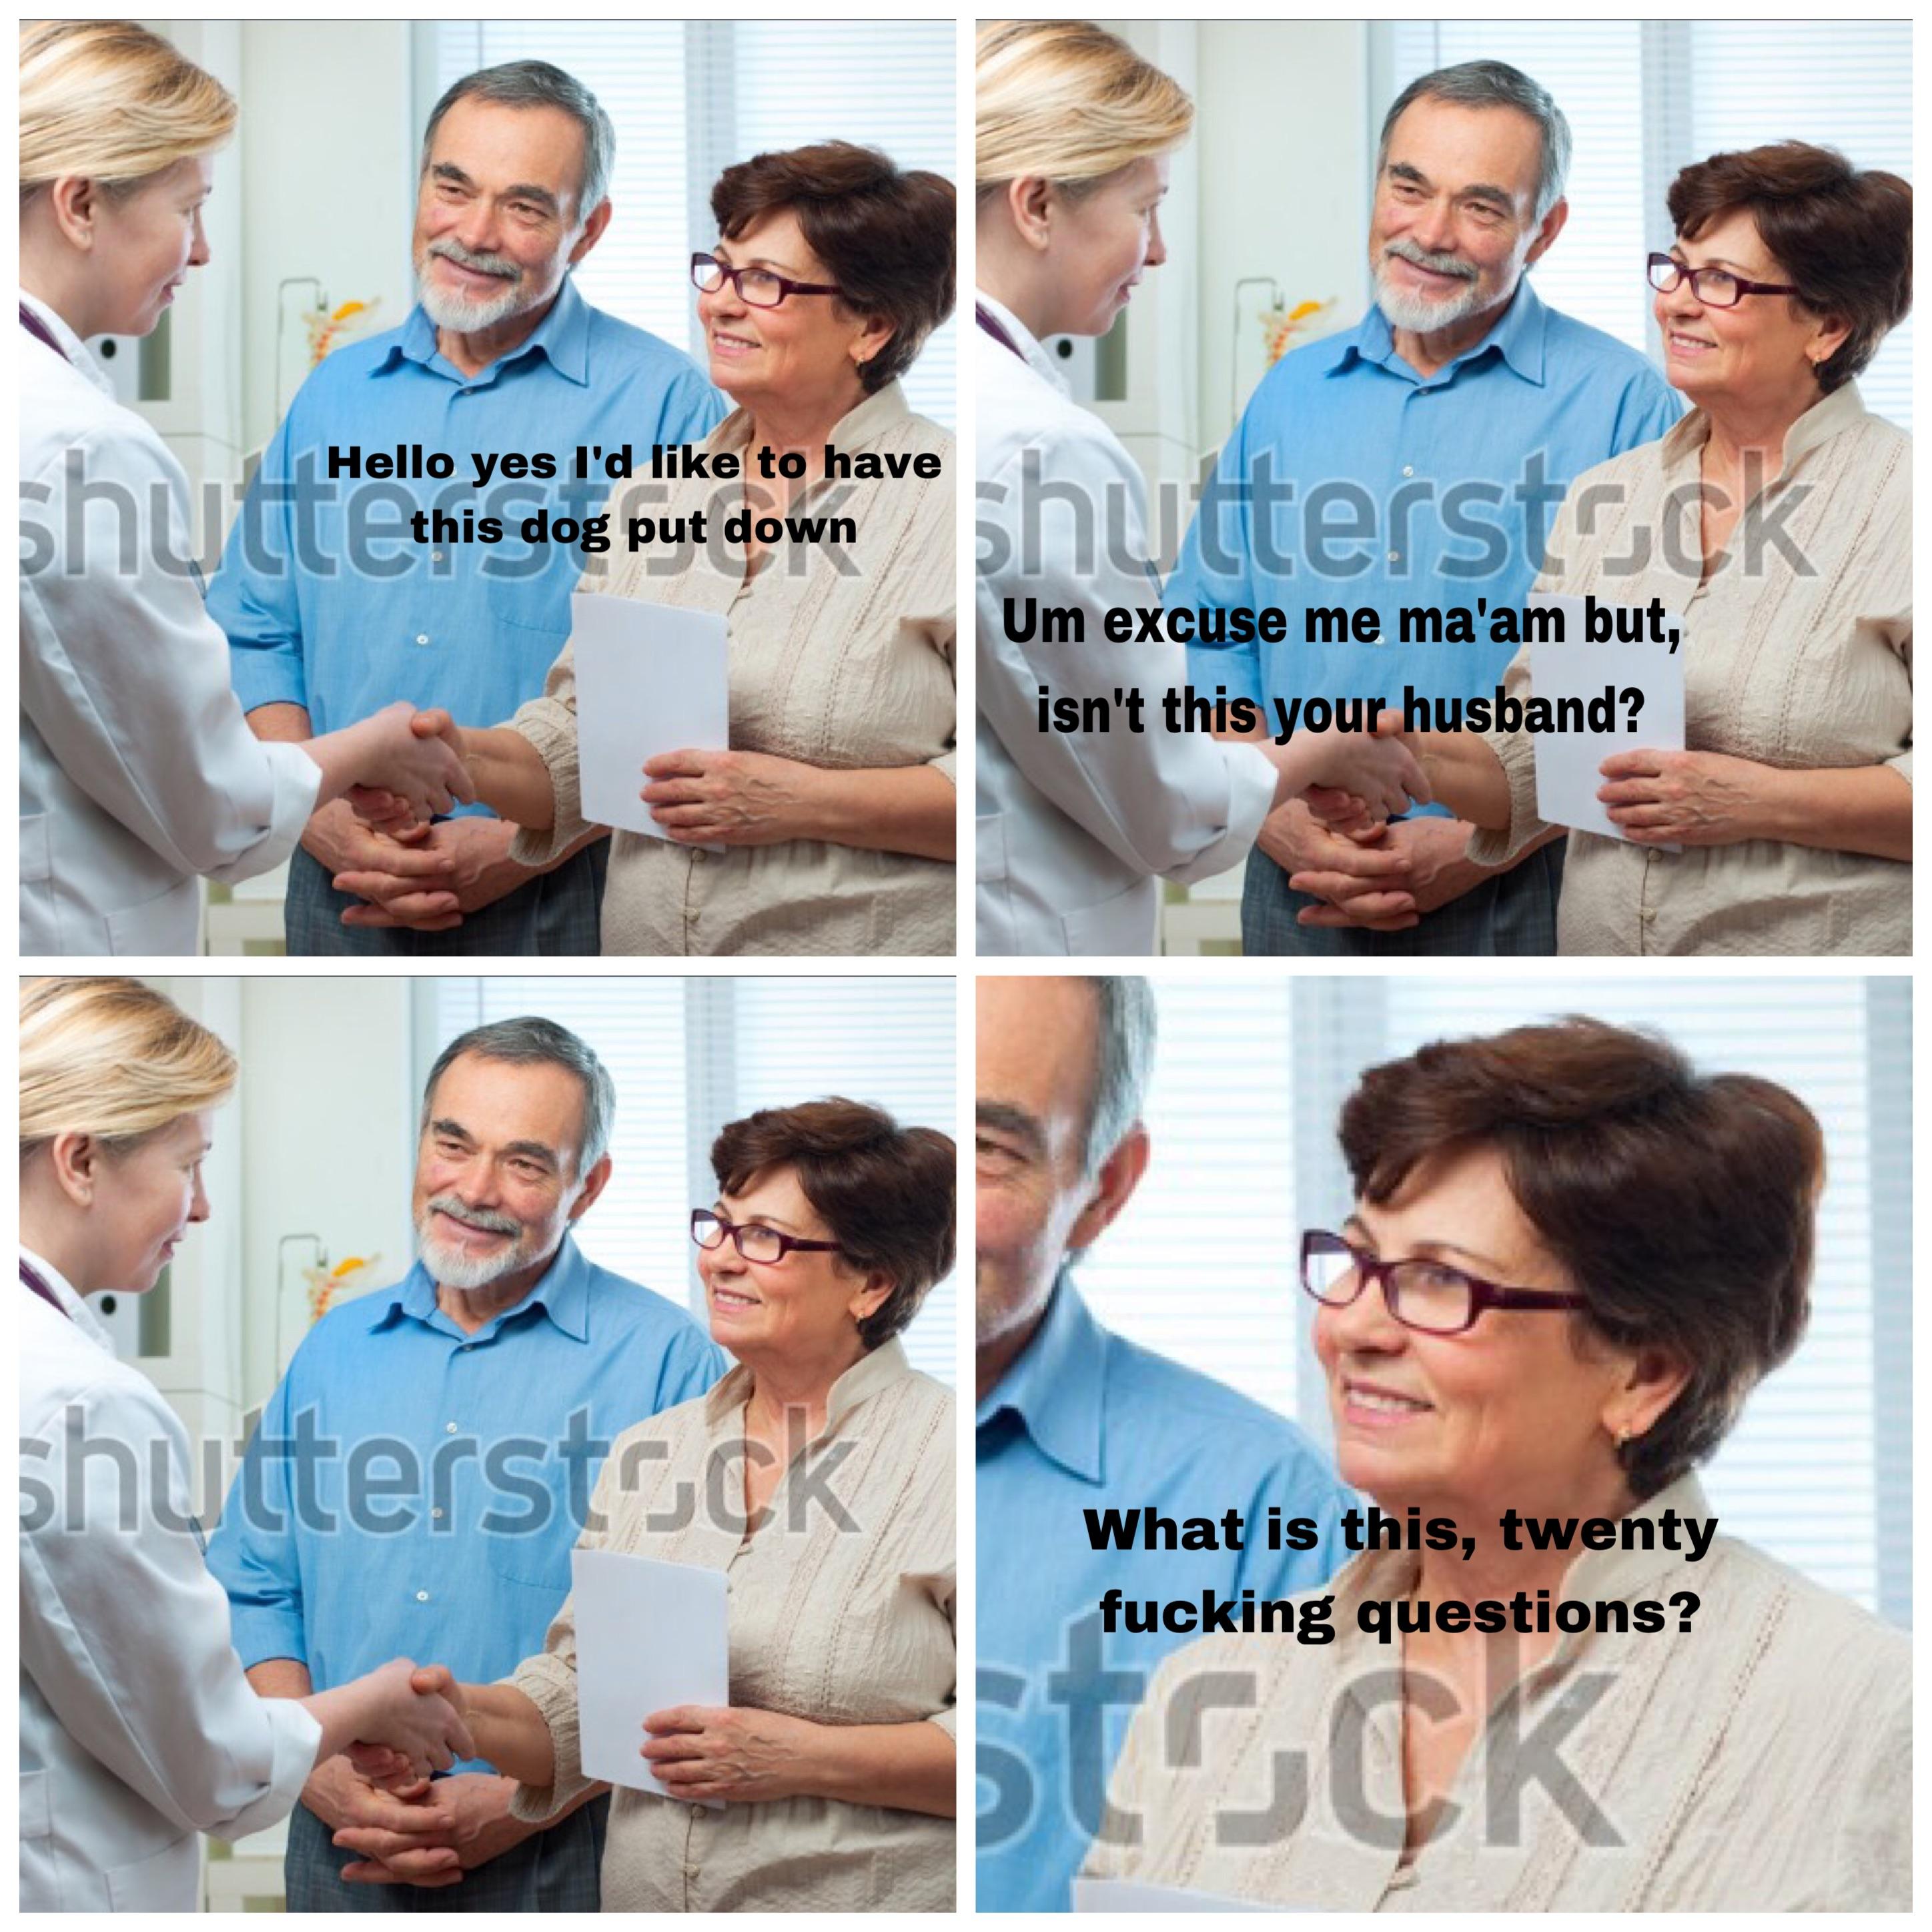 dank meme physician - Hello yes I'd to have shutt'e this dog but down shutterstoc Um excuse me ma'am but, isn't this your husband? shutterstrek What is this, twenty fucking questions?